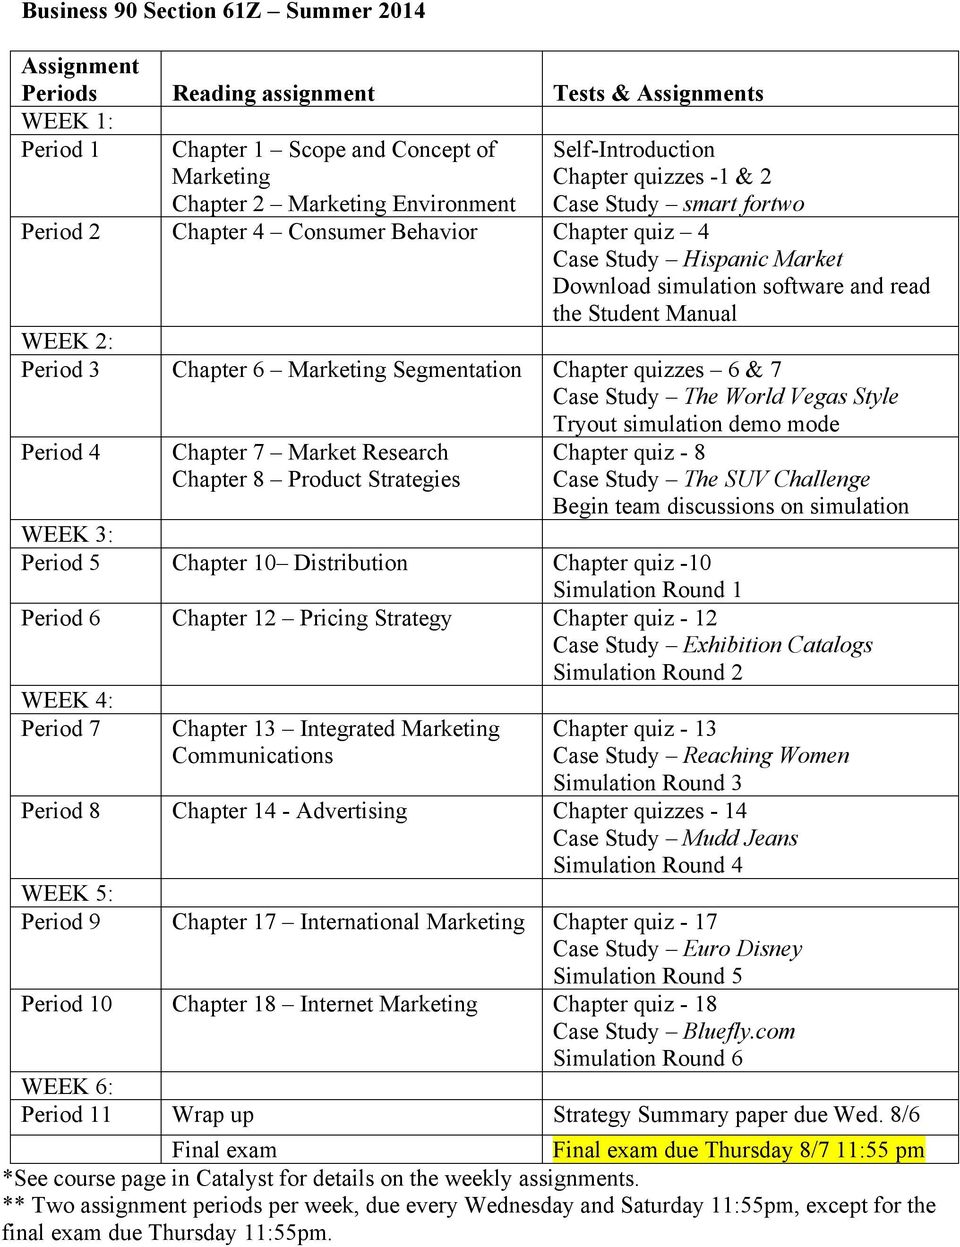 Manual WEEK 2: Period 3 Chapter 6 Marketing Segmentation Chapter quizzes 6 & 7 Case Study The World Vegas Style Tryout simulation demo mode Period 4 Chapter 7 Market Research Chapter 8 Product